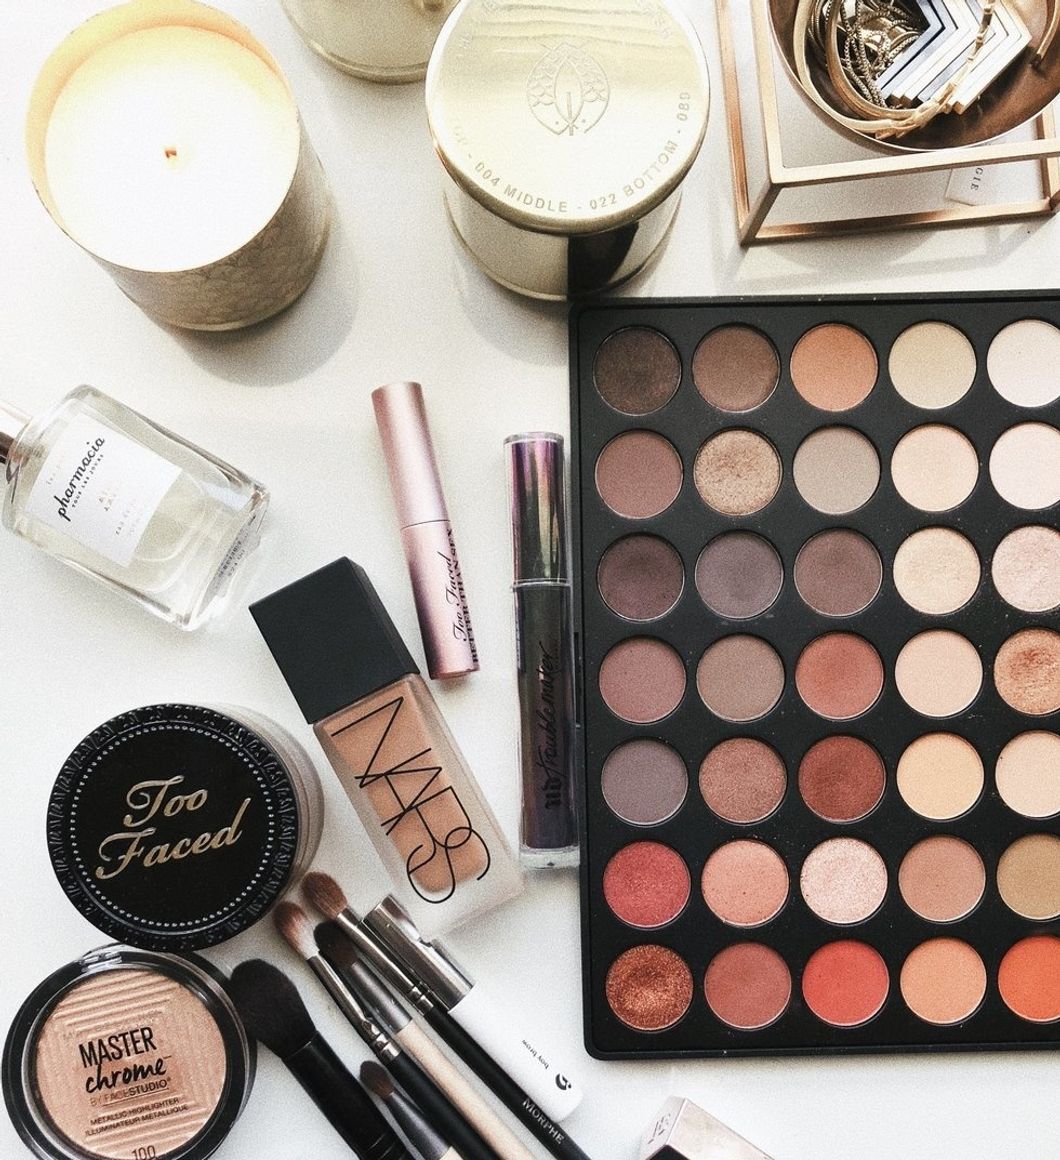 The 5 Thoughts every Girl has while shopping in sephora